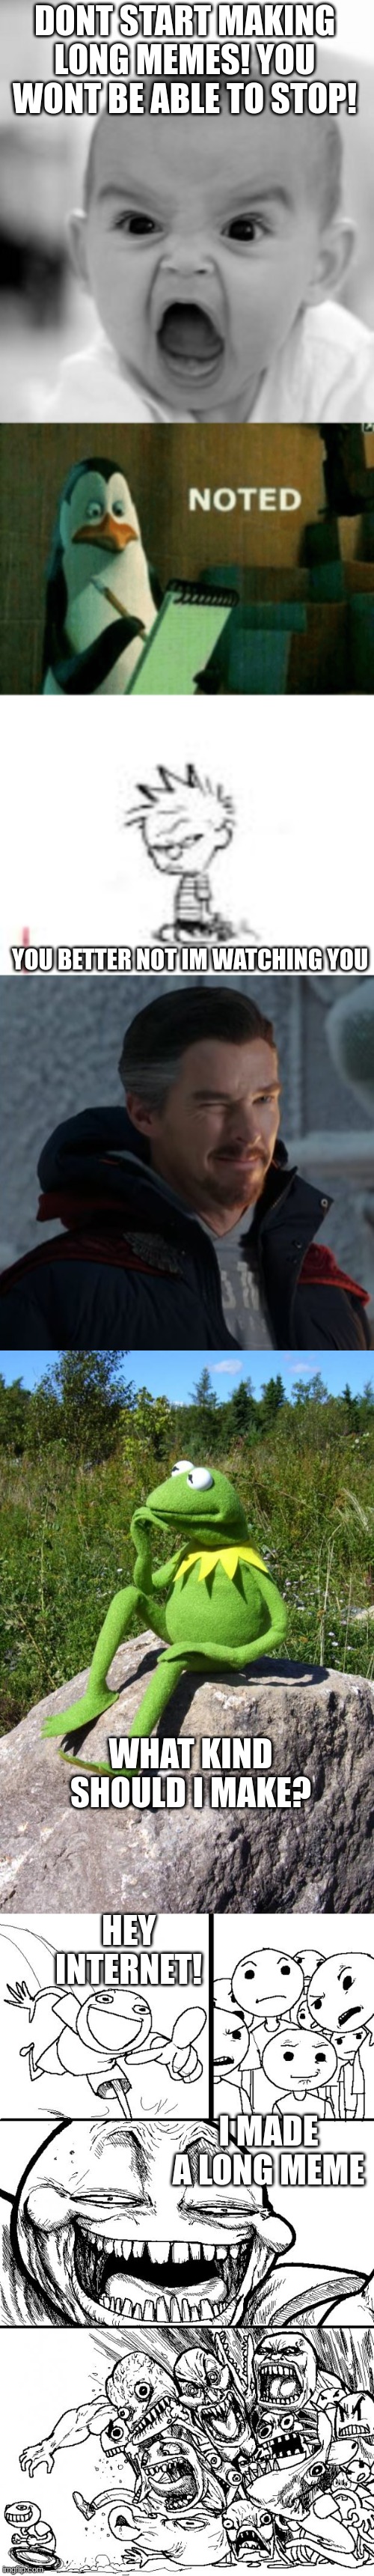 my long meme | DONT START MAKING LONG MEMES! YOU WONT BE ABLE TO STOP! YOU BETTER NOT IM WATCHING YOU; WHAT KIND SHOULD I MAKE? HEY INTERNET! I MADE A LONG MEME | image tagged in memes,angry baby,noted,calvin and hobbes fans will get this,the wink of doctor strange,kermit-thinking | made w/ Imgflip meme maker